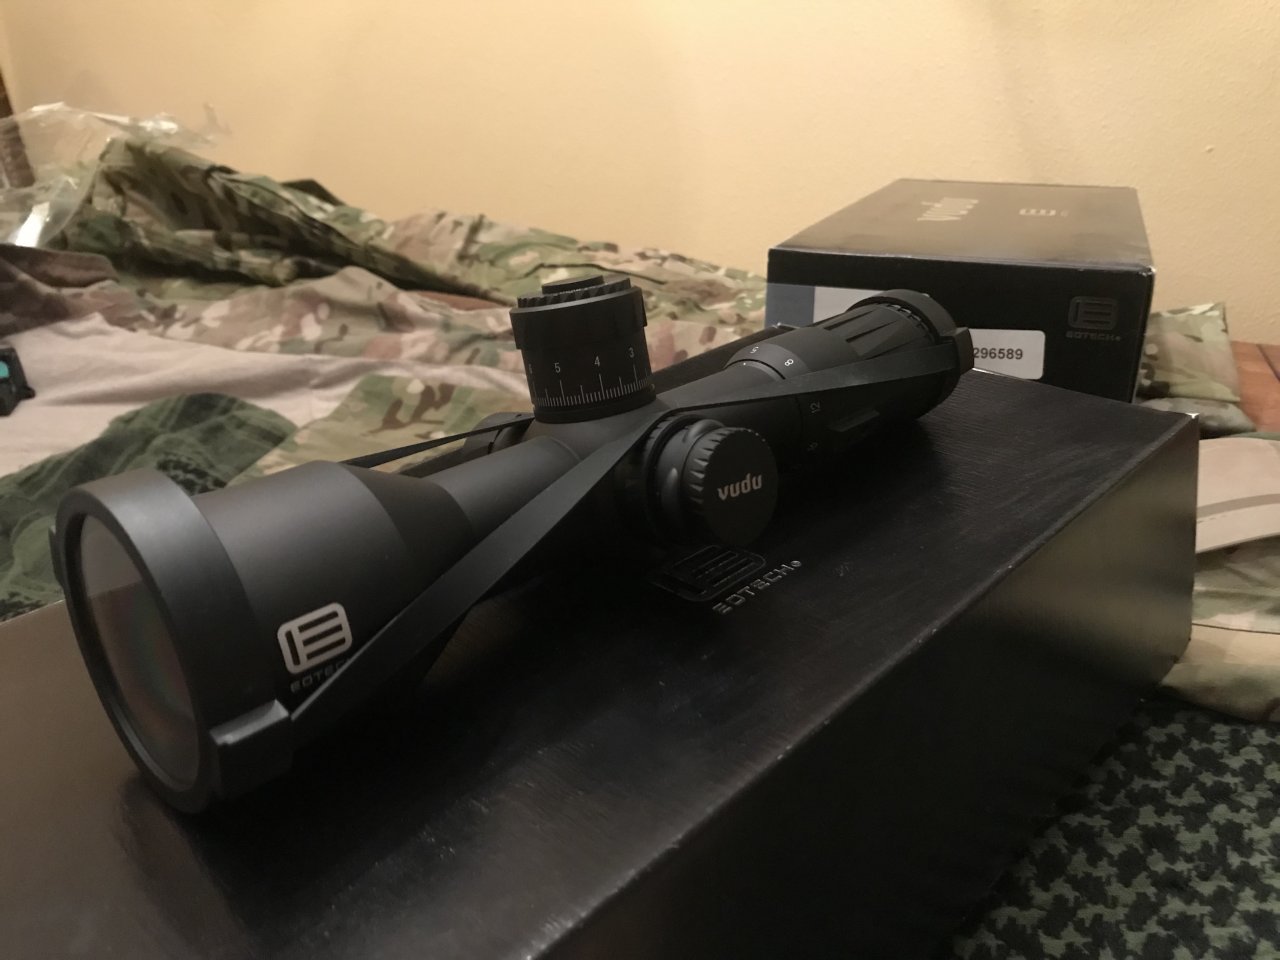 EOTech VUDU - 5-25X50 - VDU5-25FFMD3 - It has the MD3 Ret Brand New, Box and Paperwork - $1750